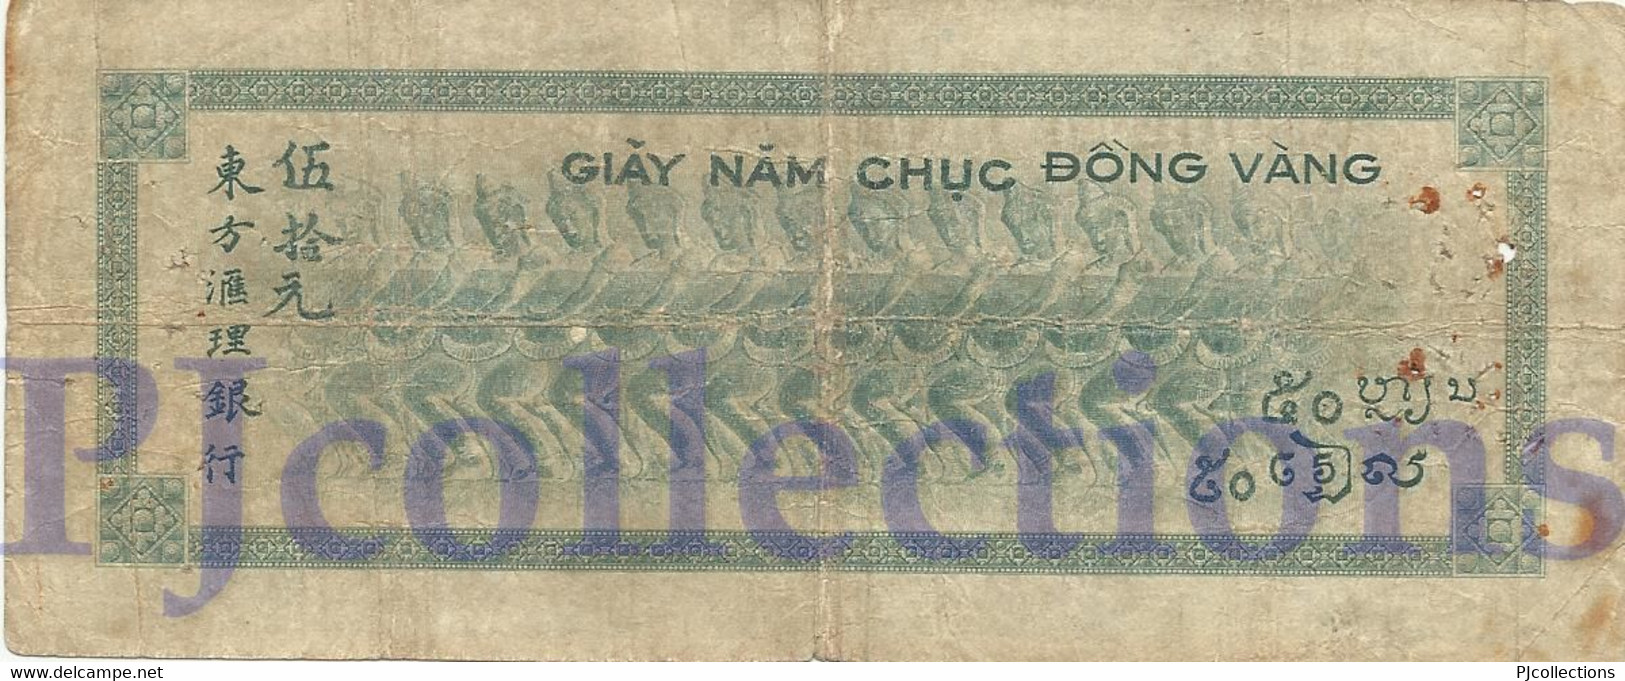 FRENCH INDOCHINA 50 PIASTRES 1945 PICK 77a VG/F - Indochina